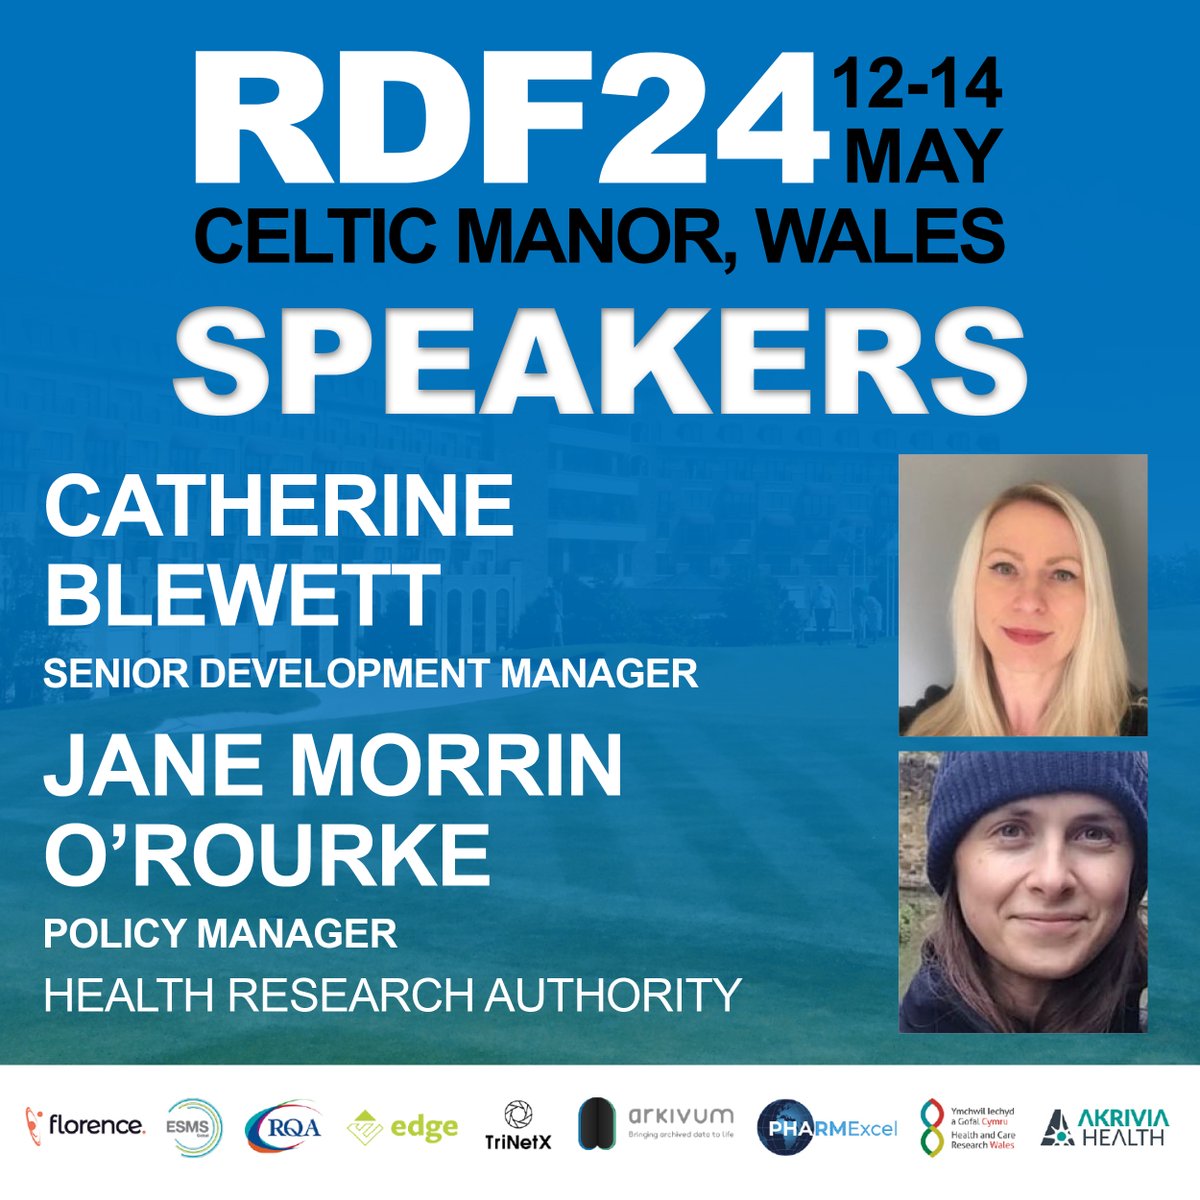 We are delighted to announce that Catherine Blewett and Jane Morrin O'Rourke of @HRA_Latest will present the session “Right People, Right Place, Right Approach – Diversification and Decentralisation of Research” at #RDF24. View the full programme here: rdfconference.org/rdf24-programm…